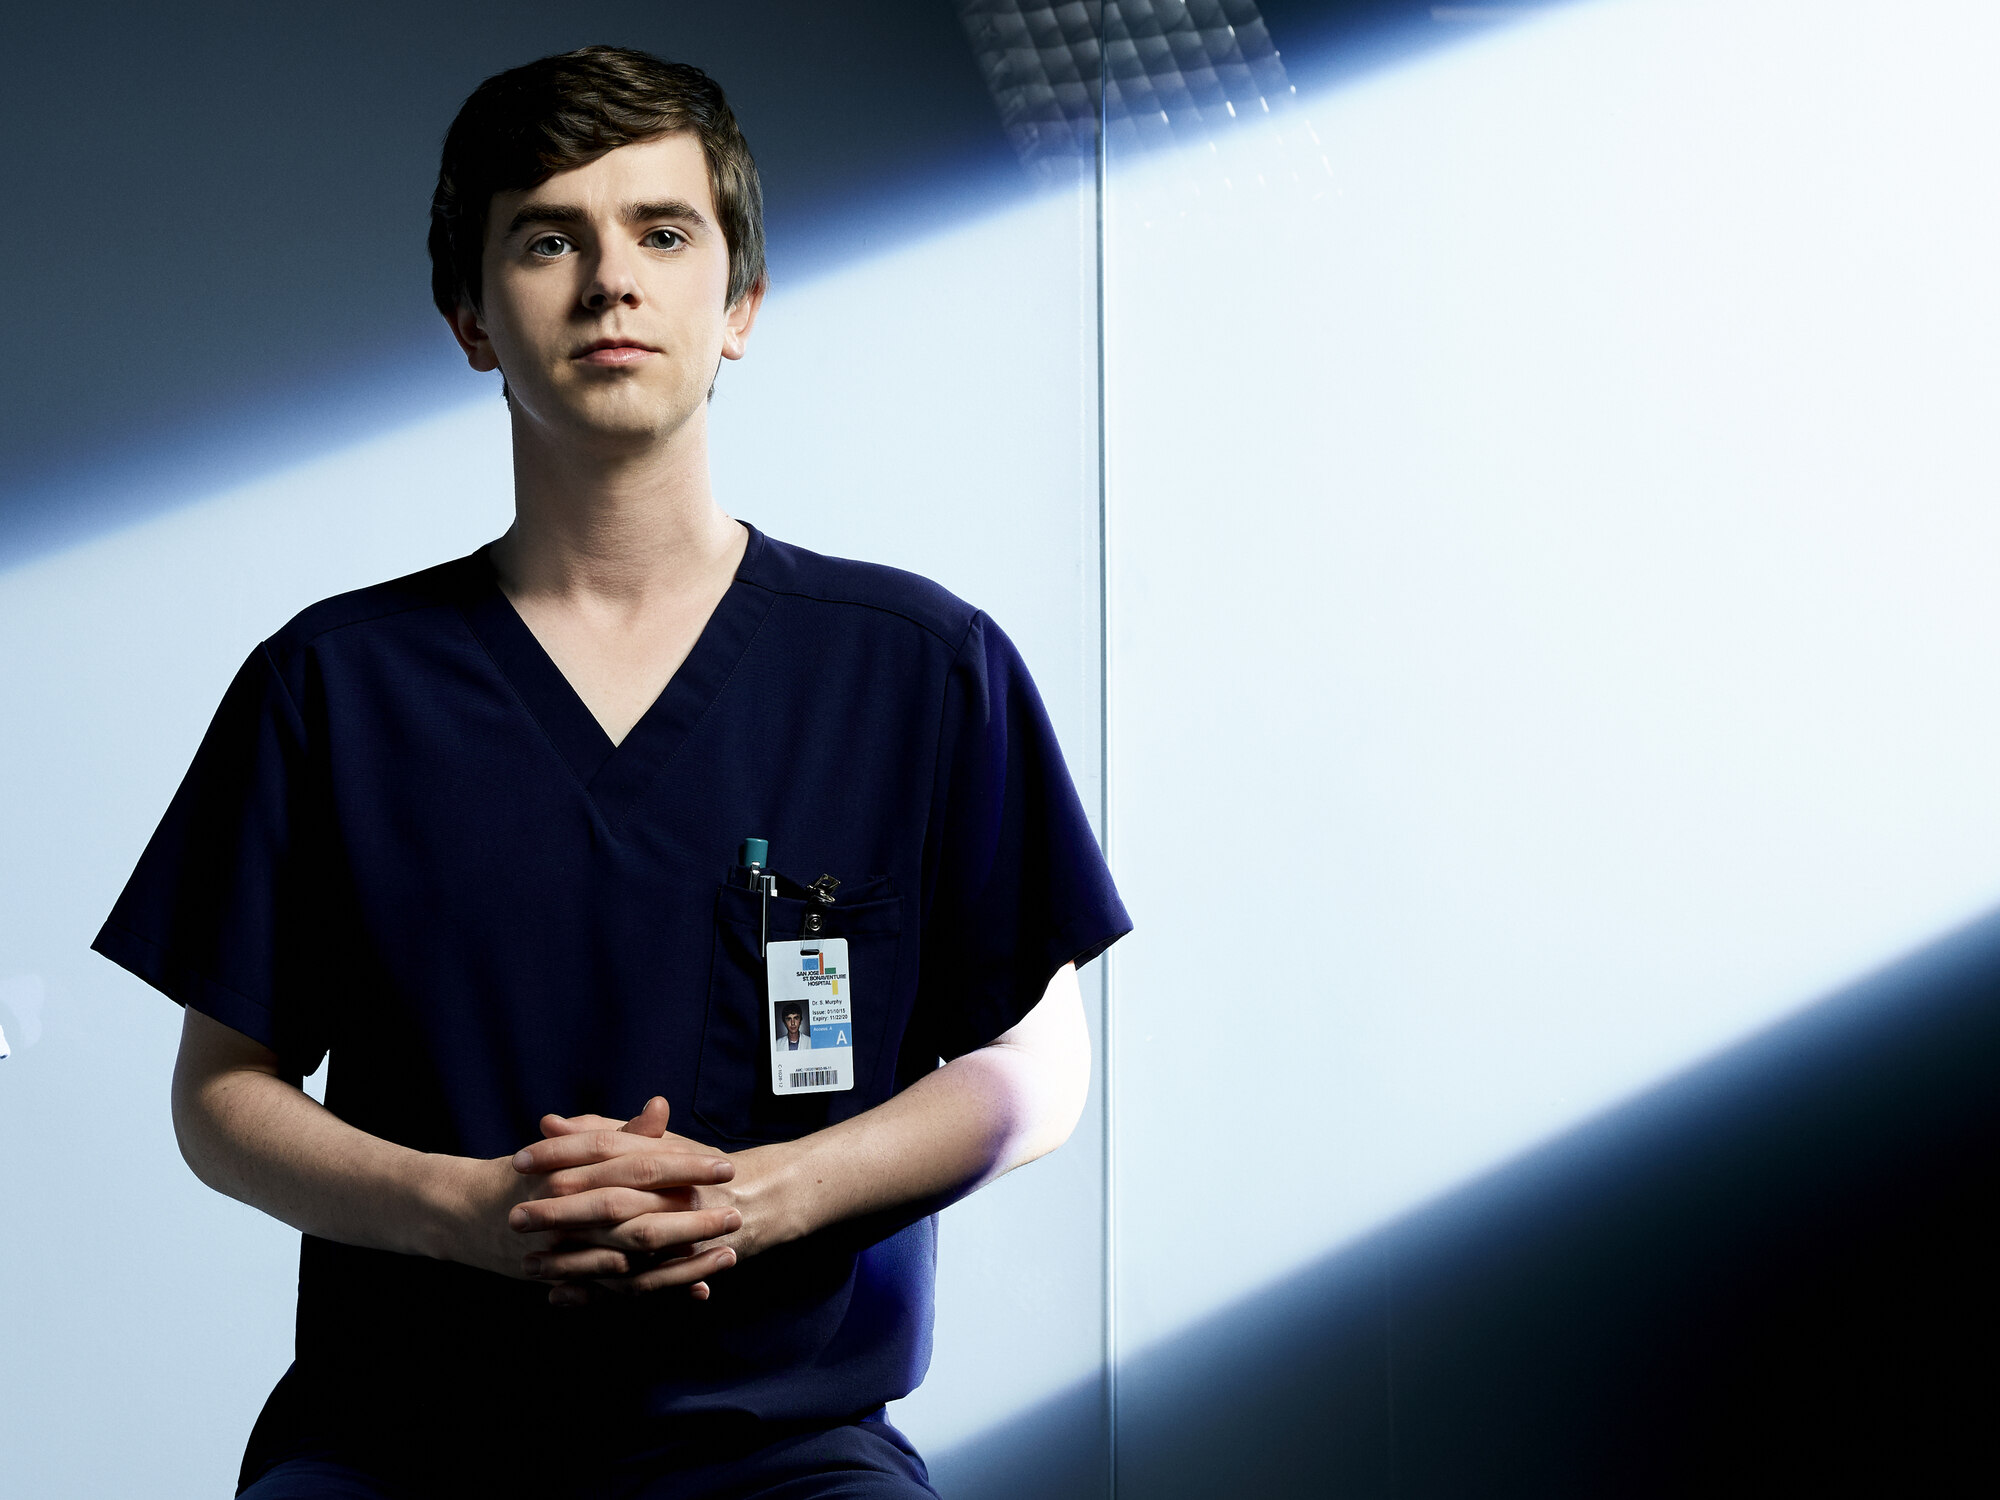 HD wallpaper: TV Show, The Good Doctor | Wallpaper Flare